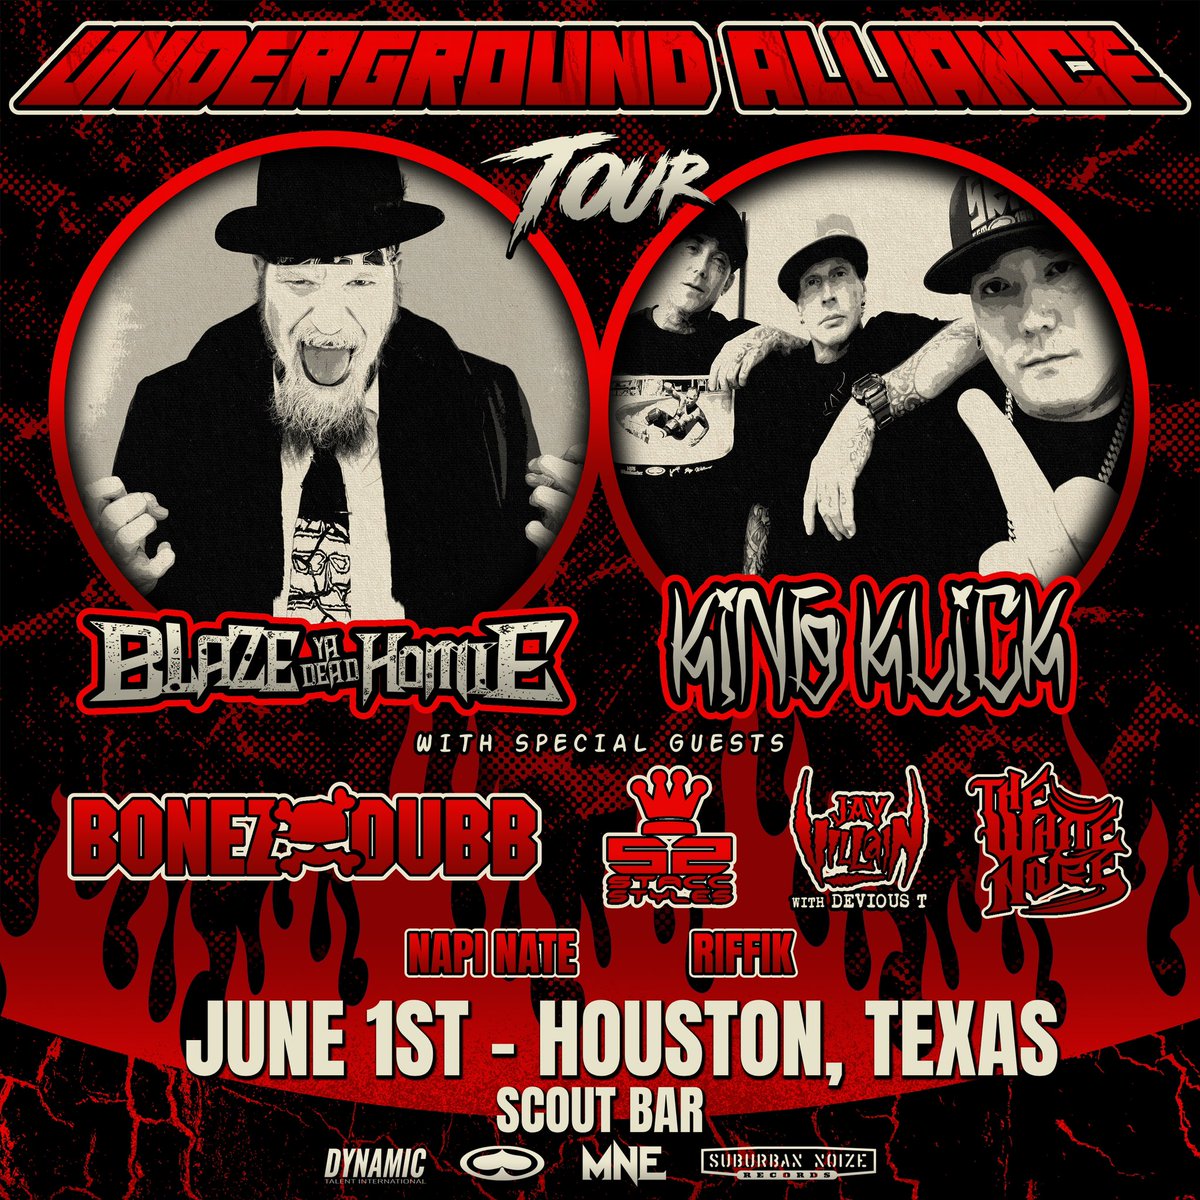 The #undergroundalliance tour added @bonezamb to the already amazing lineup in #houston this Wednesday! Get your tix now!